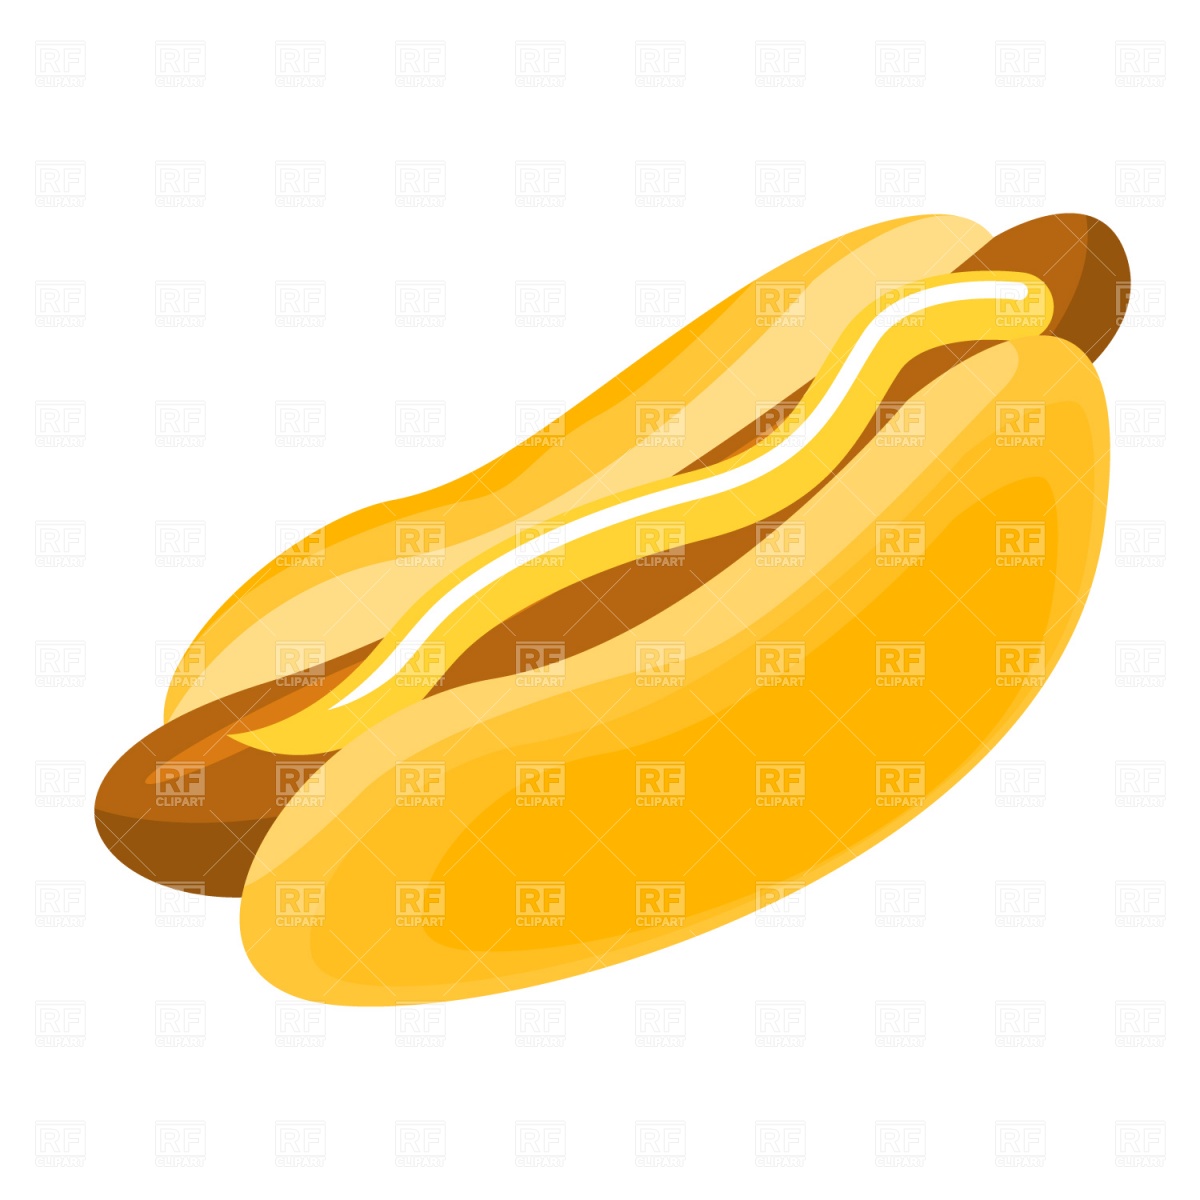 Hot Dog   Fast Food 1378 Food And Beverages Download Royalty Free